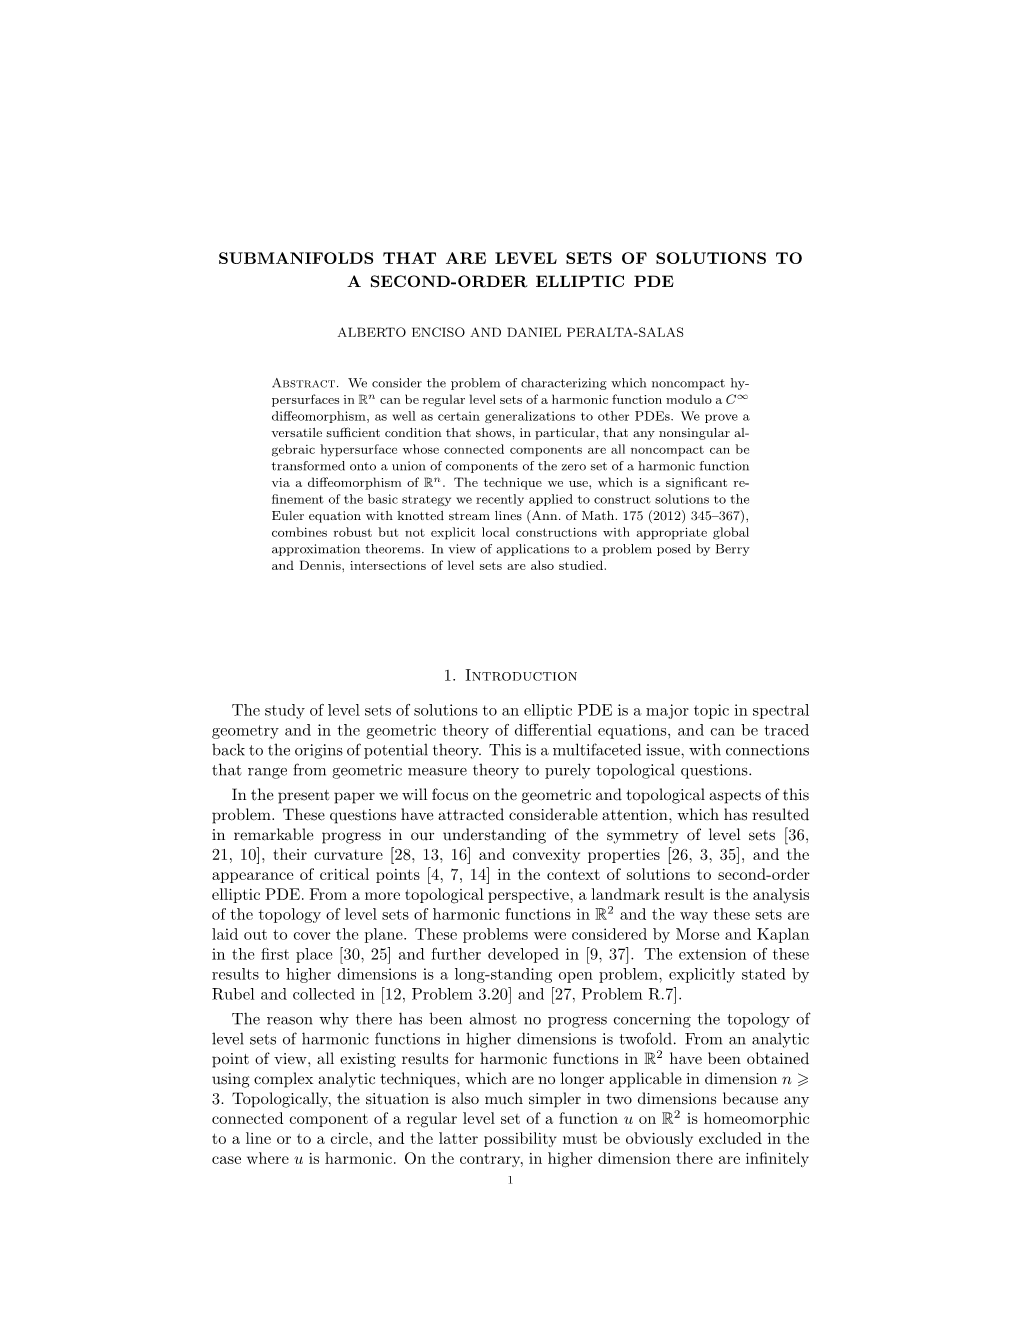 Submanifolds That Are Level Sets of Solutions to a Second-Order Elliptic Pde